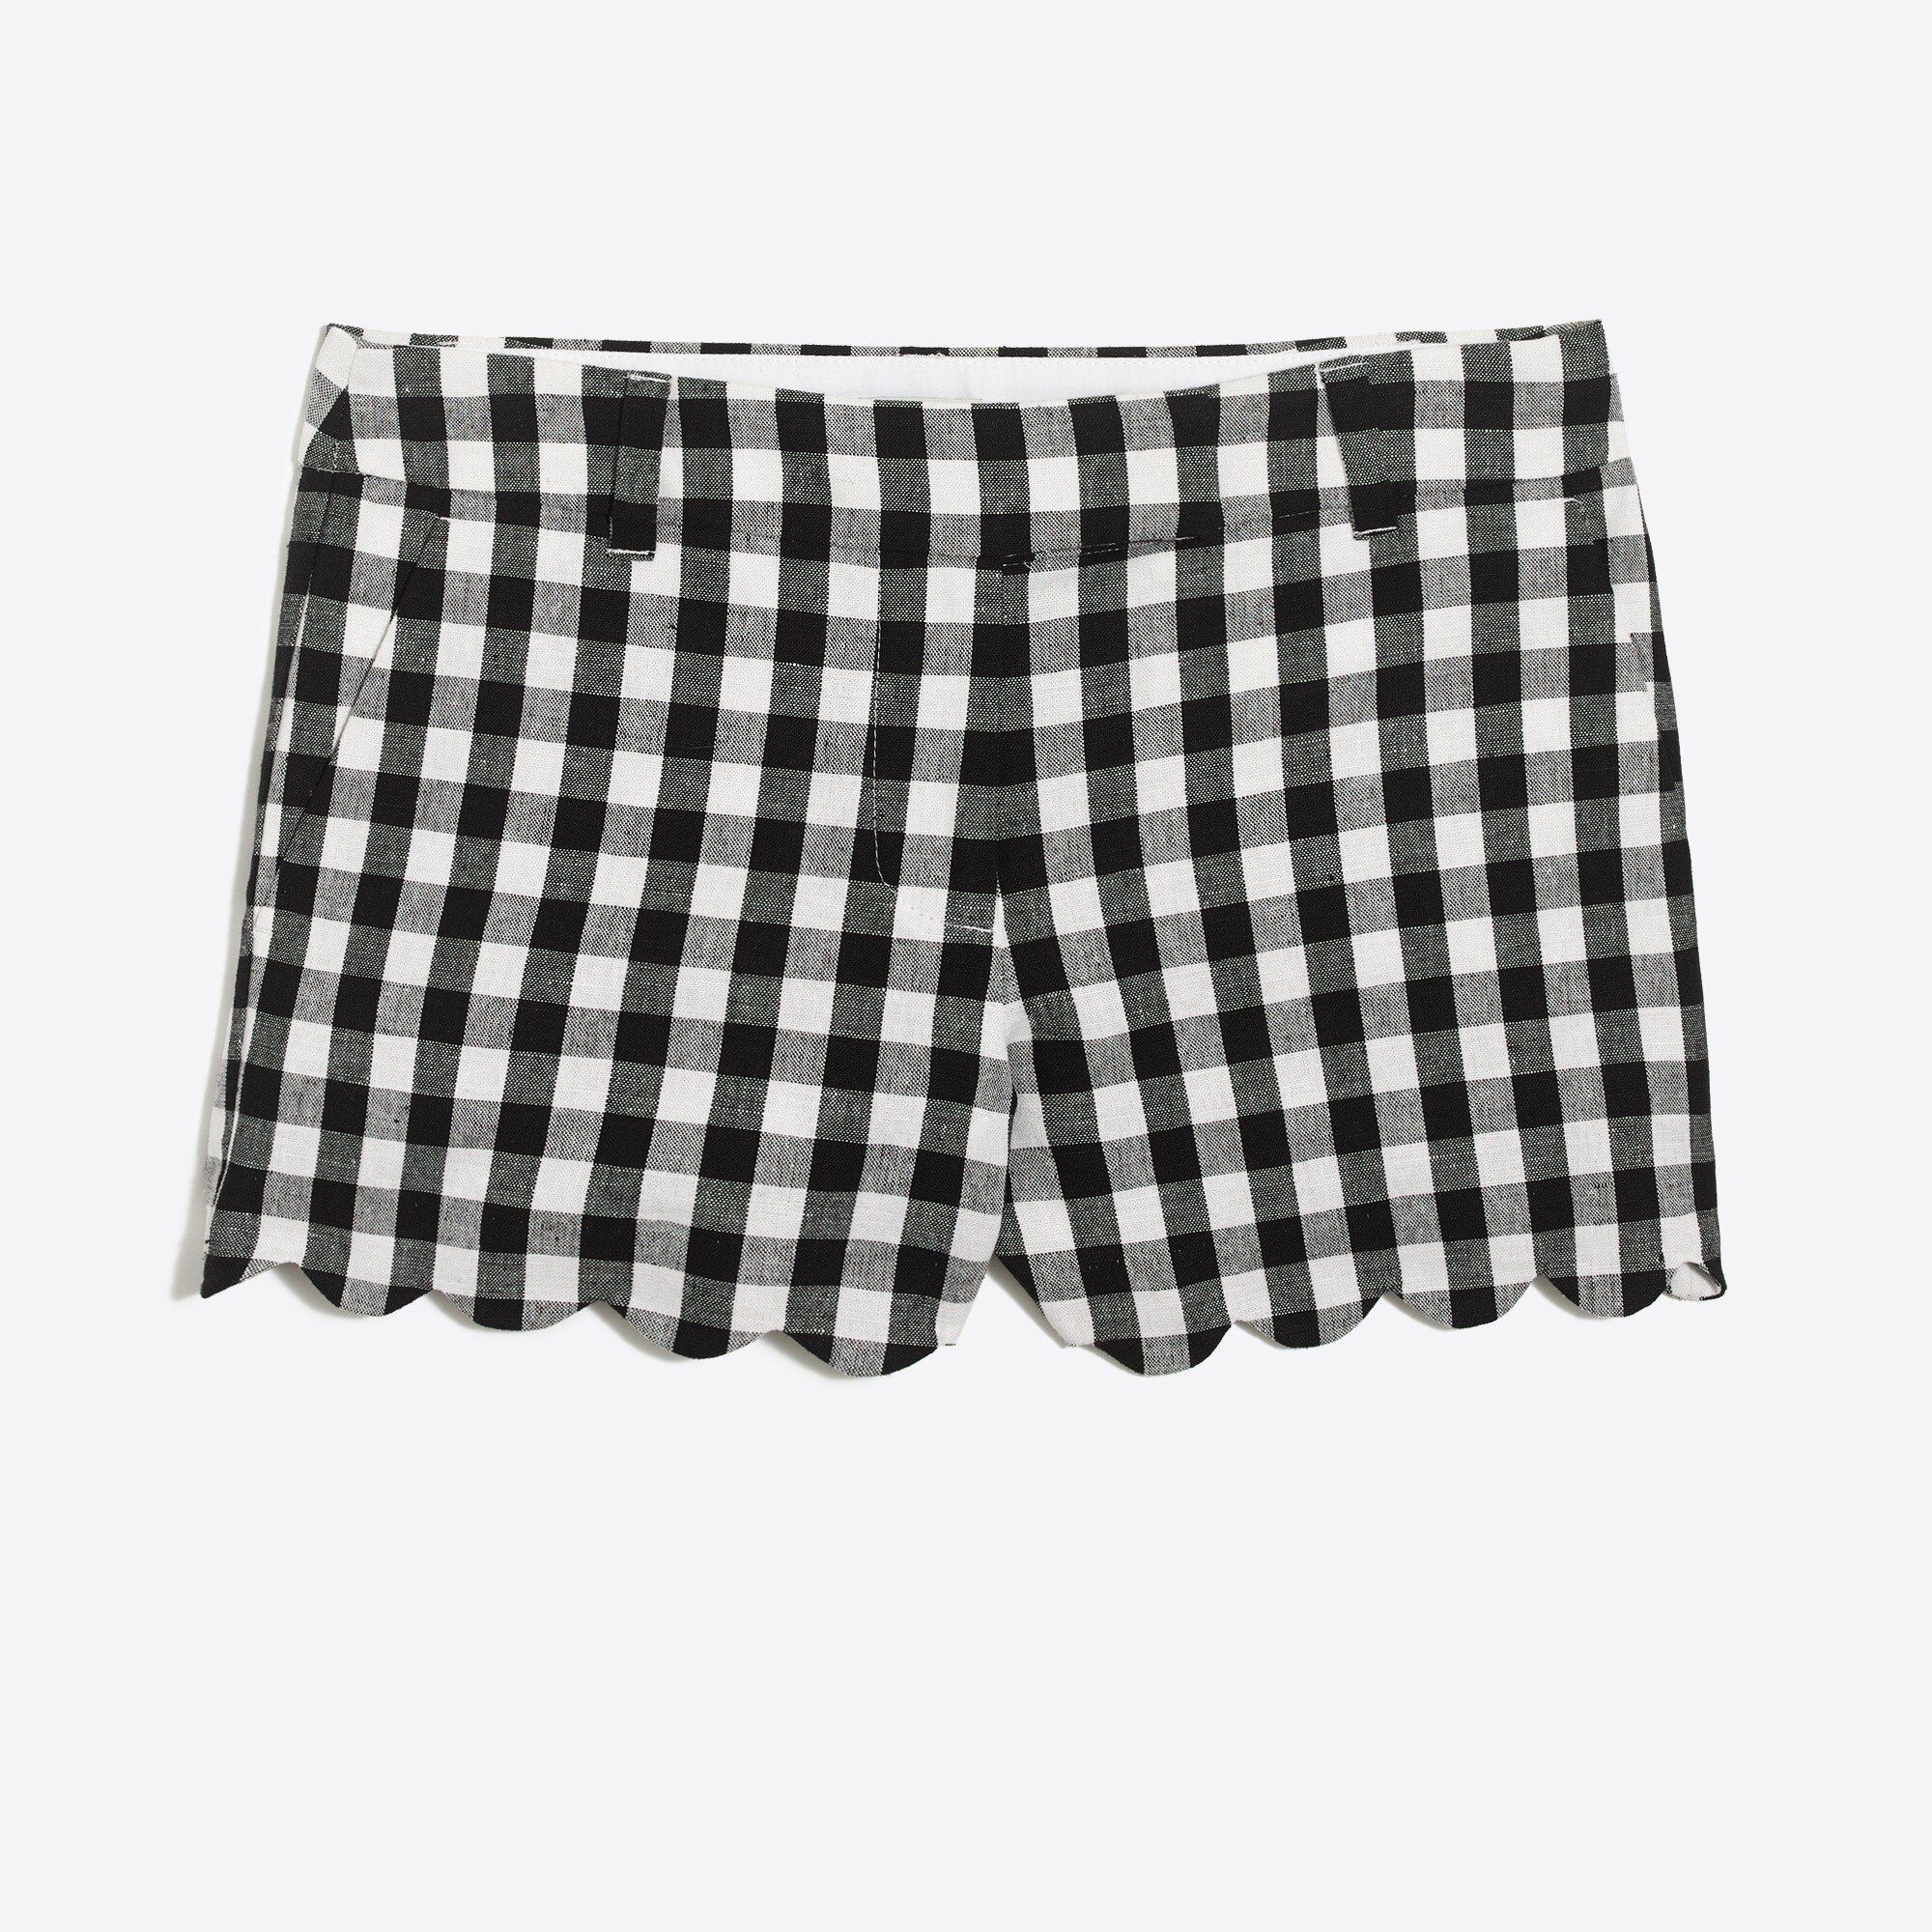 https://factory.jcrew.com/p/womens_clothing/new_arrivals/shorts/printed-4-scalloped-short/H5608?colo | J.Crew Factory